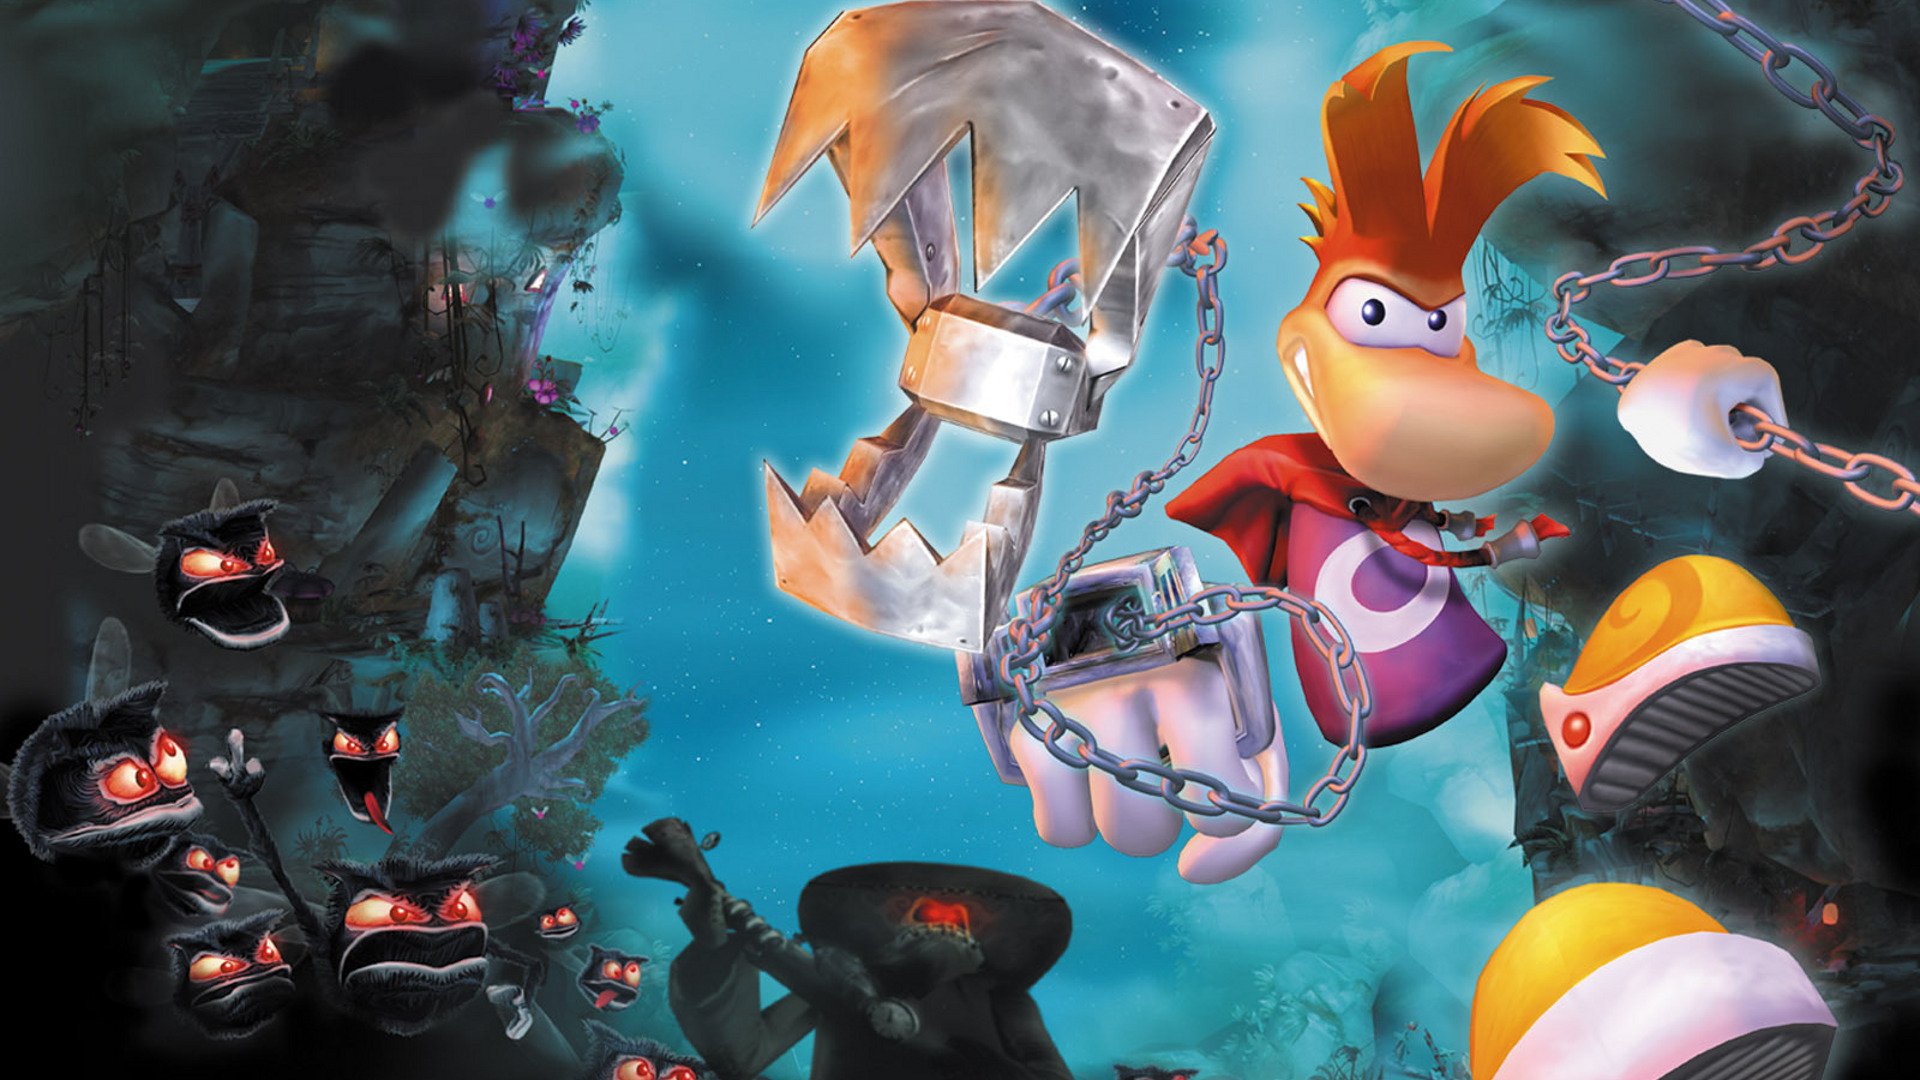 Rayman 10th Anniversary Collection